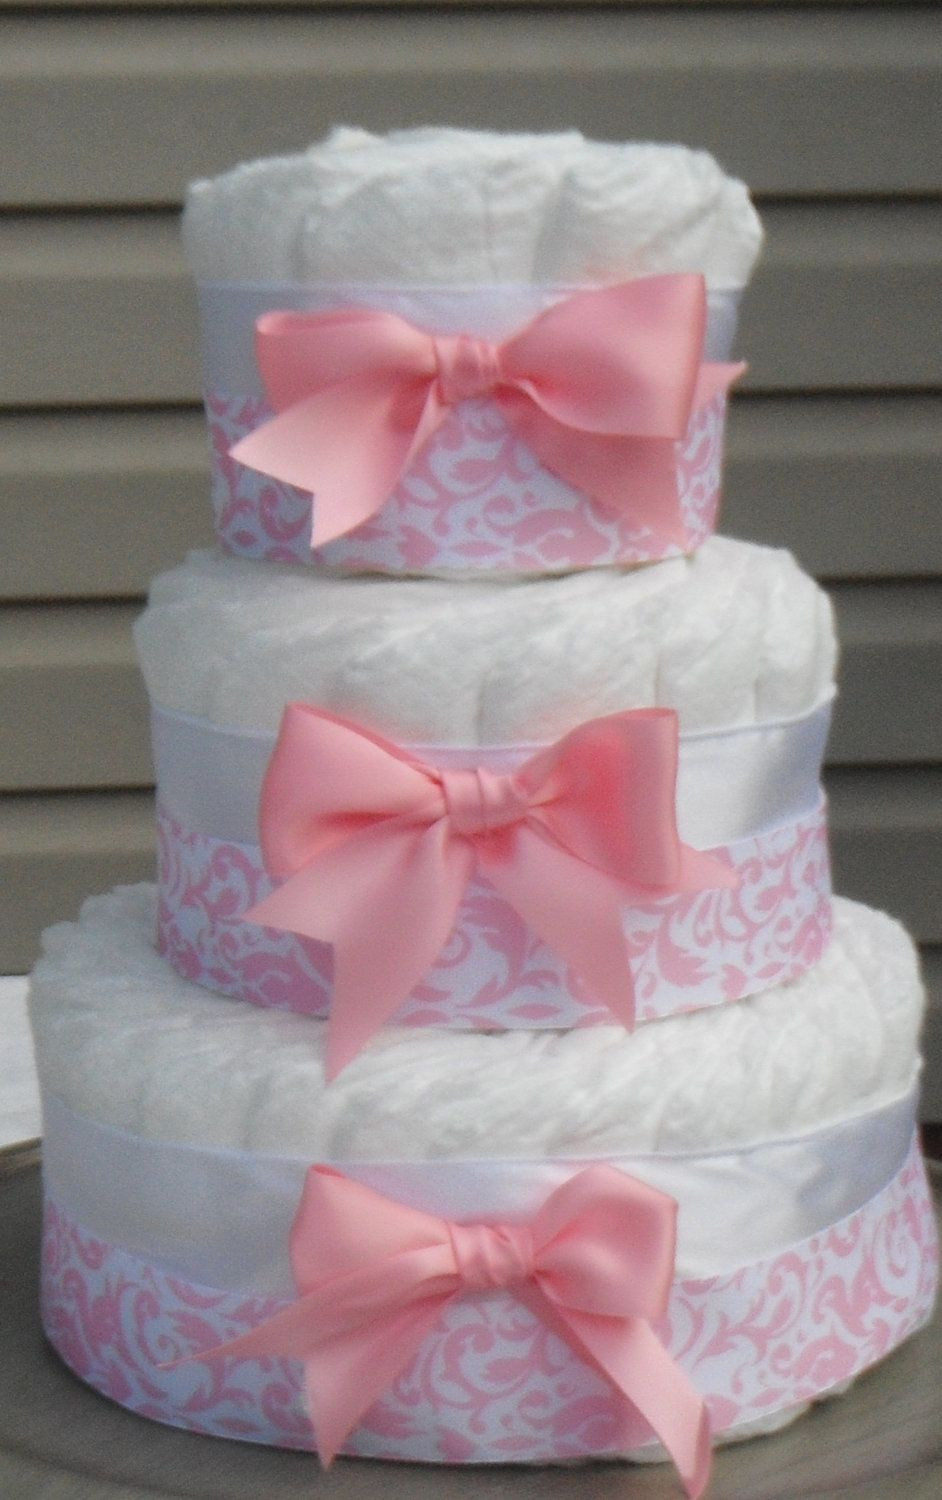 Baby Shower Gifts Made With Diapers
 Pink Damask Diaper Cake for Girls Baby Shower Gift Baby